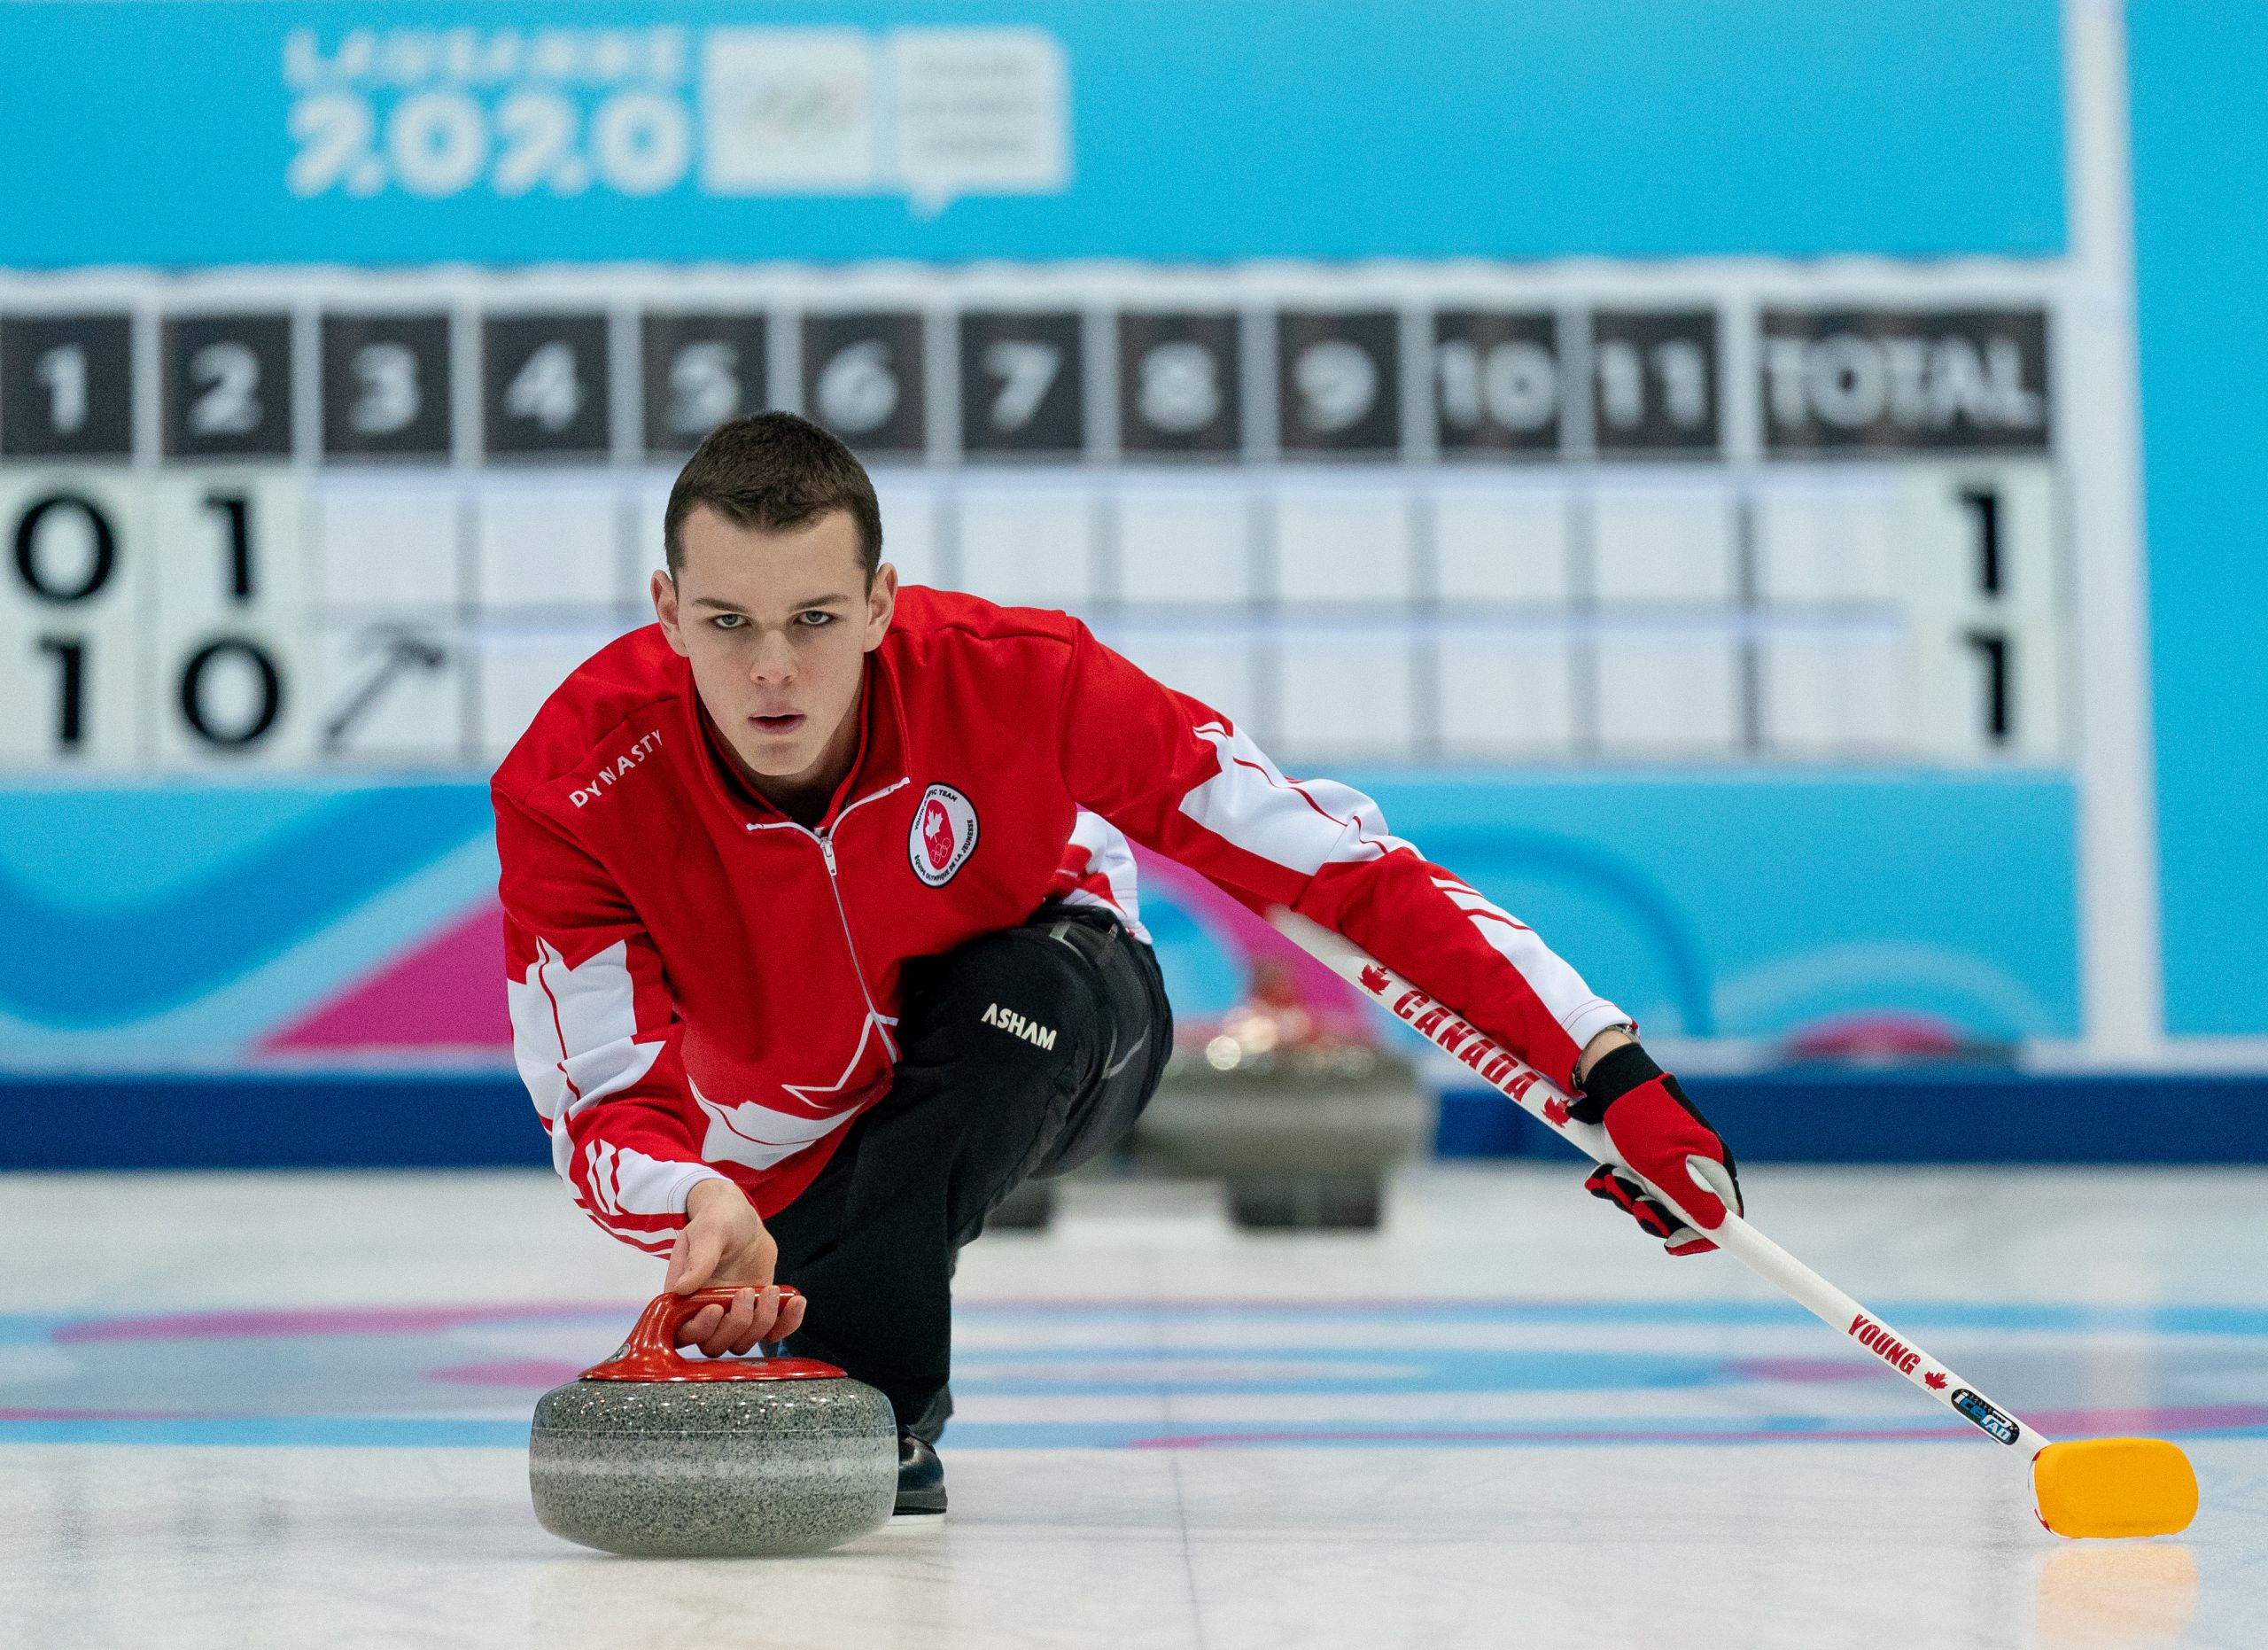 NBCs Curling Coverage Focuses On Sound And Strategy To Grow Viewership